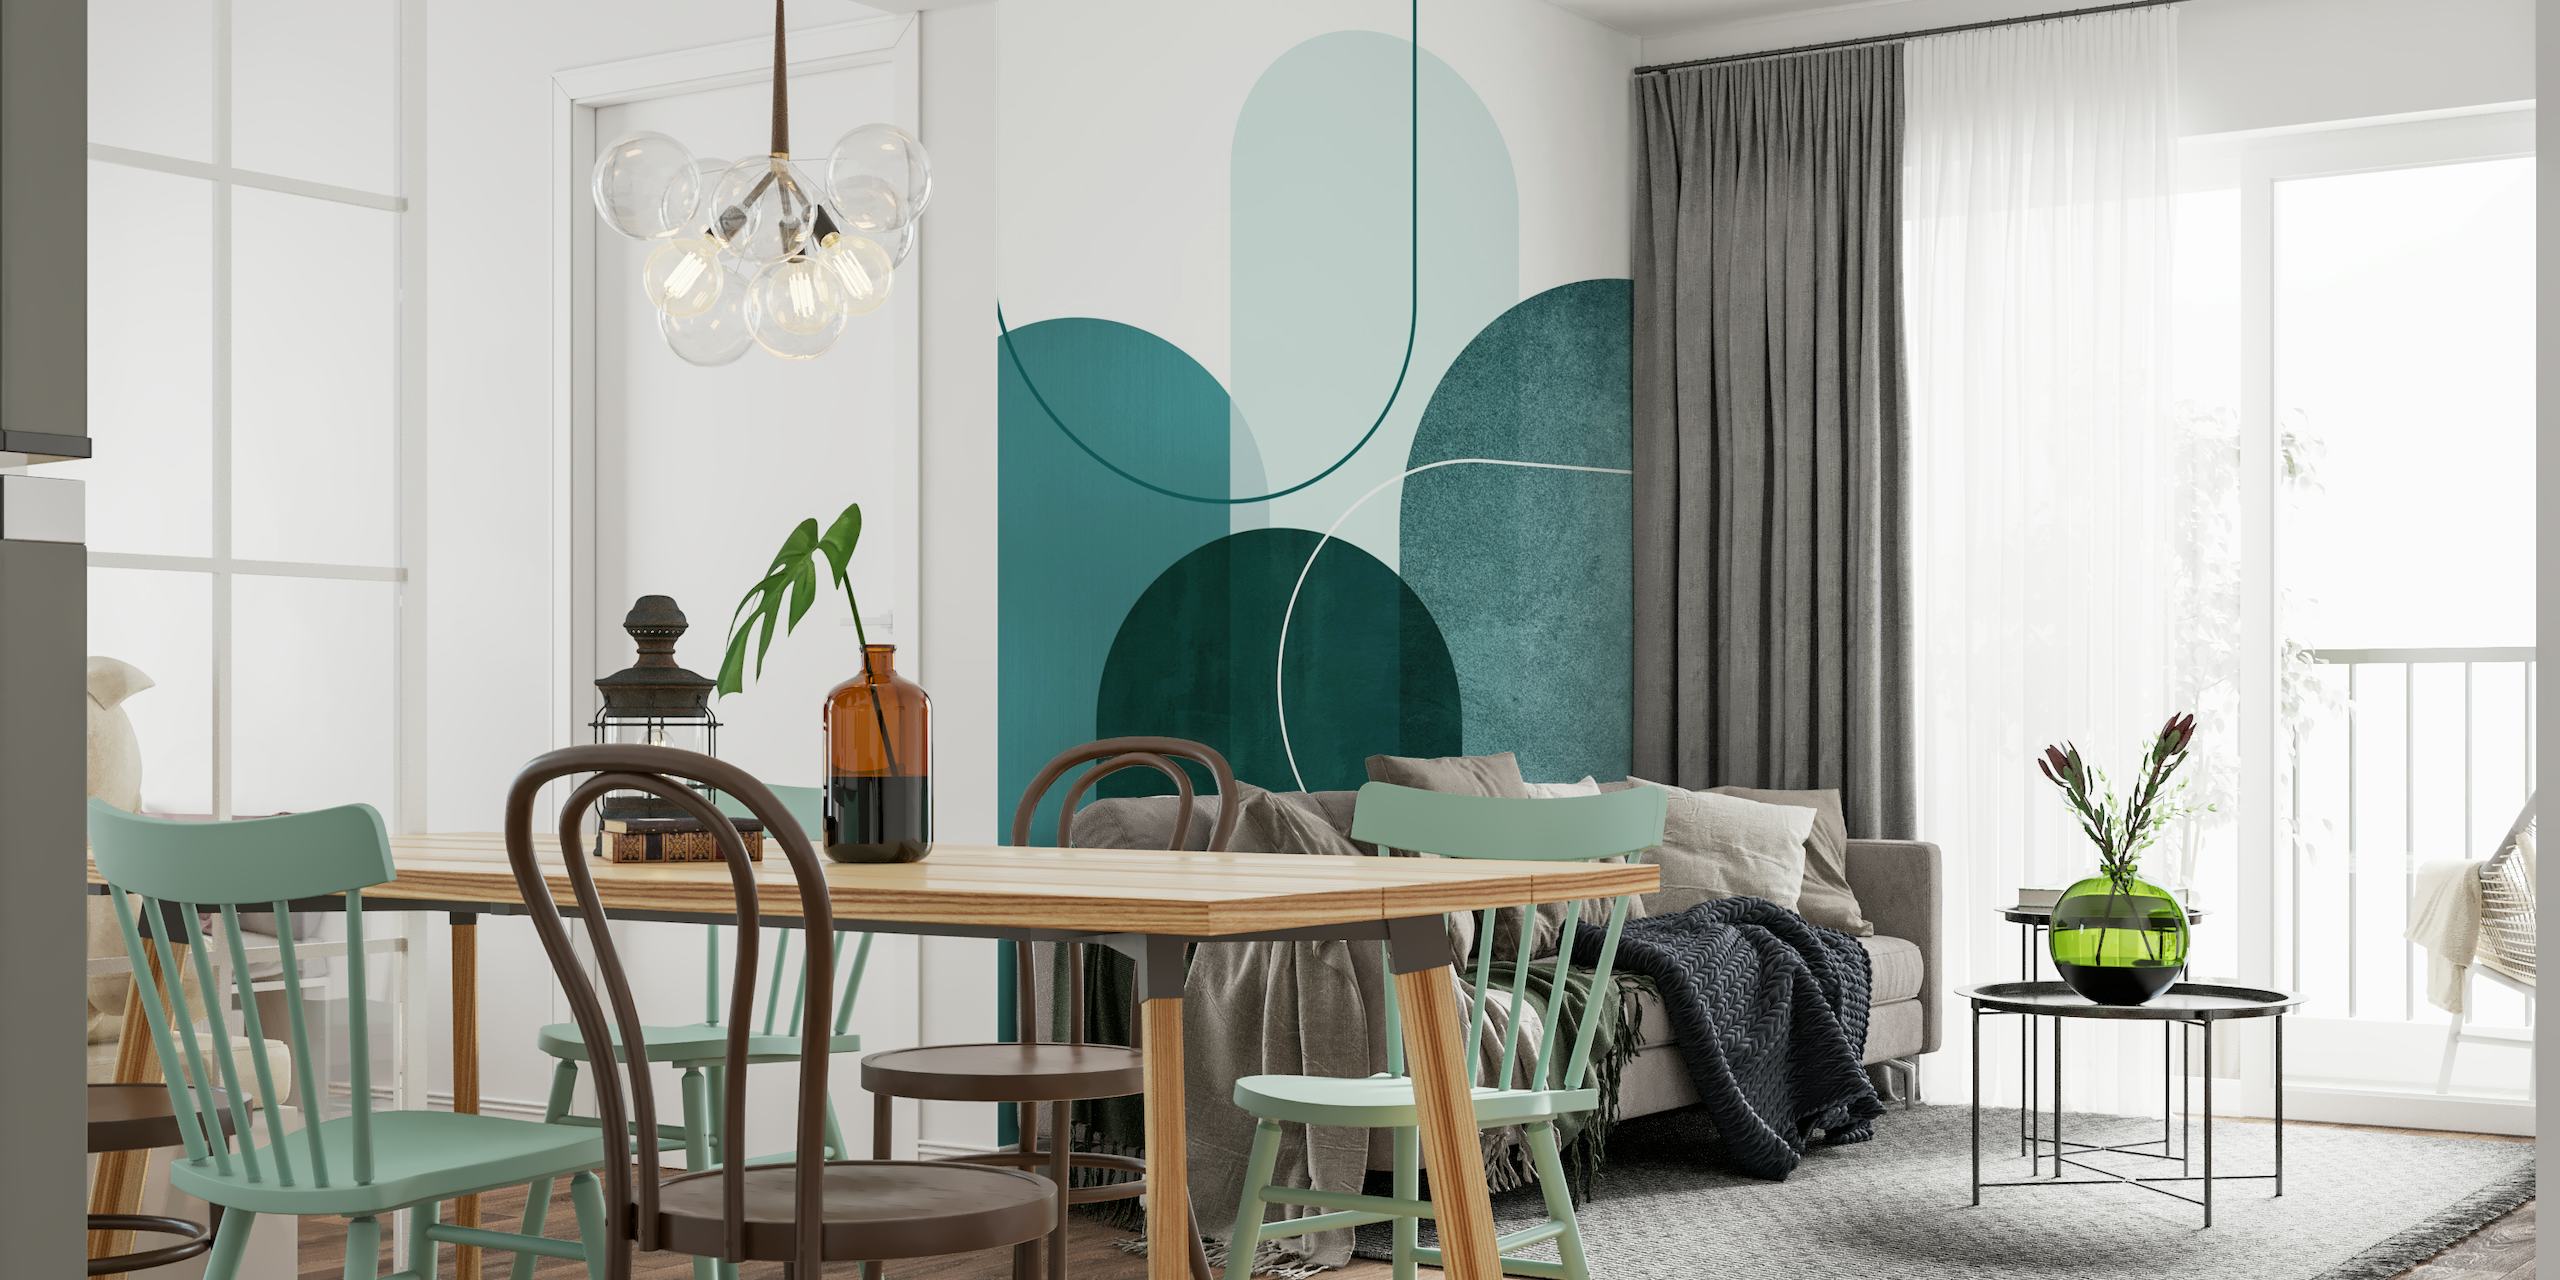 Teal Mid Century Arches wallpaper